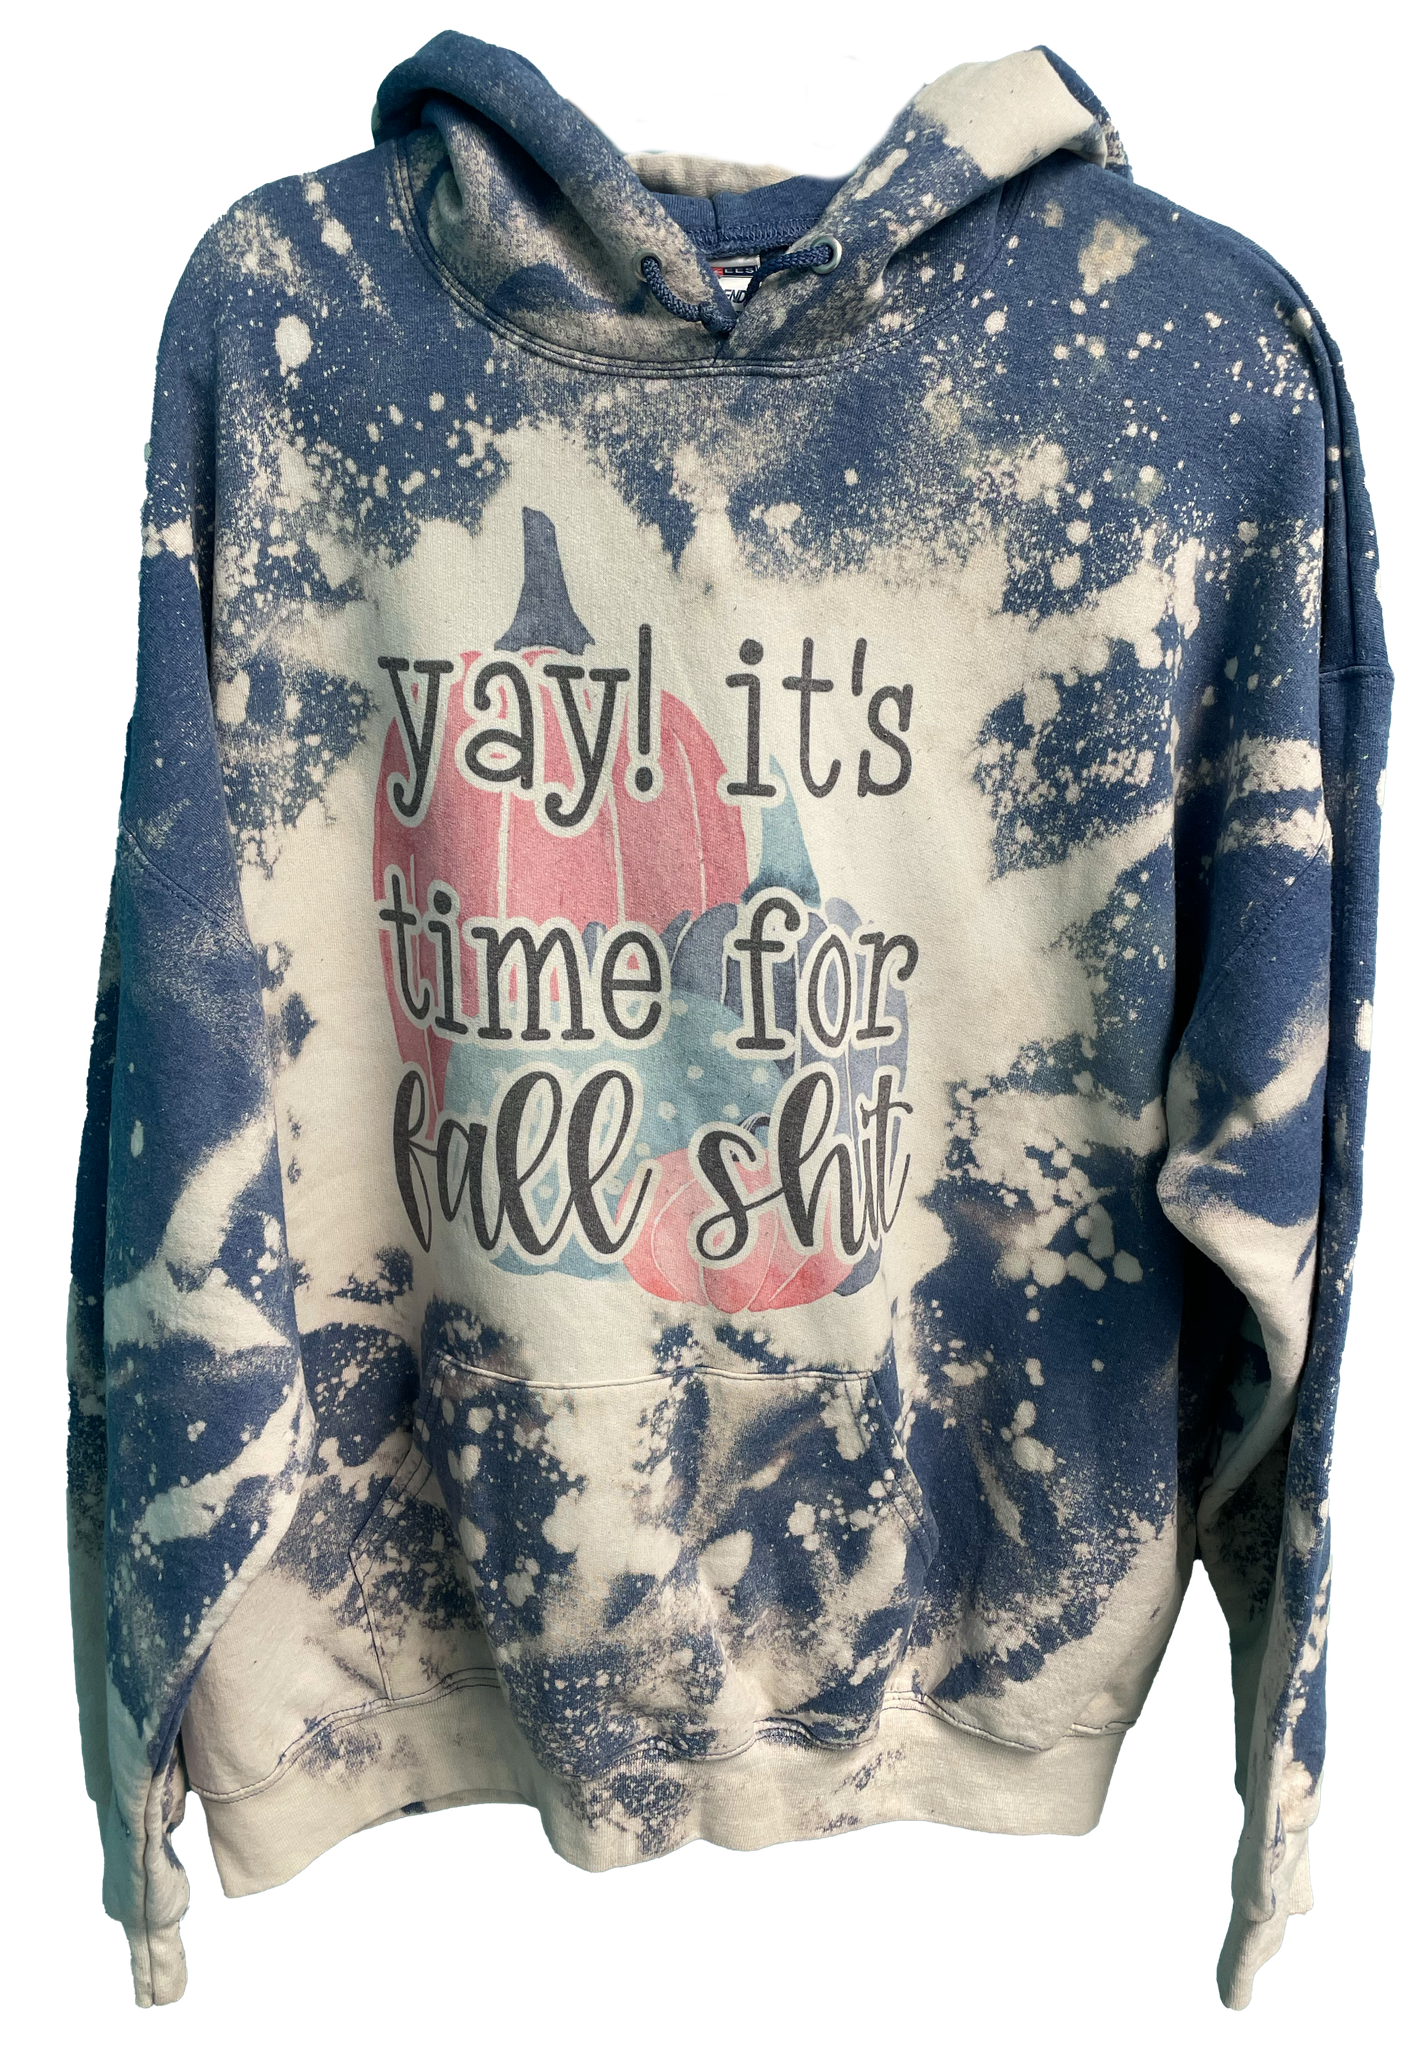 Yay! Its time for fall shit Sweatshirt